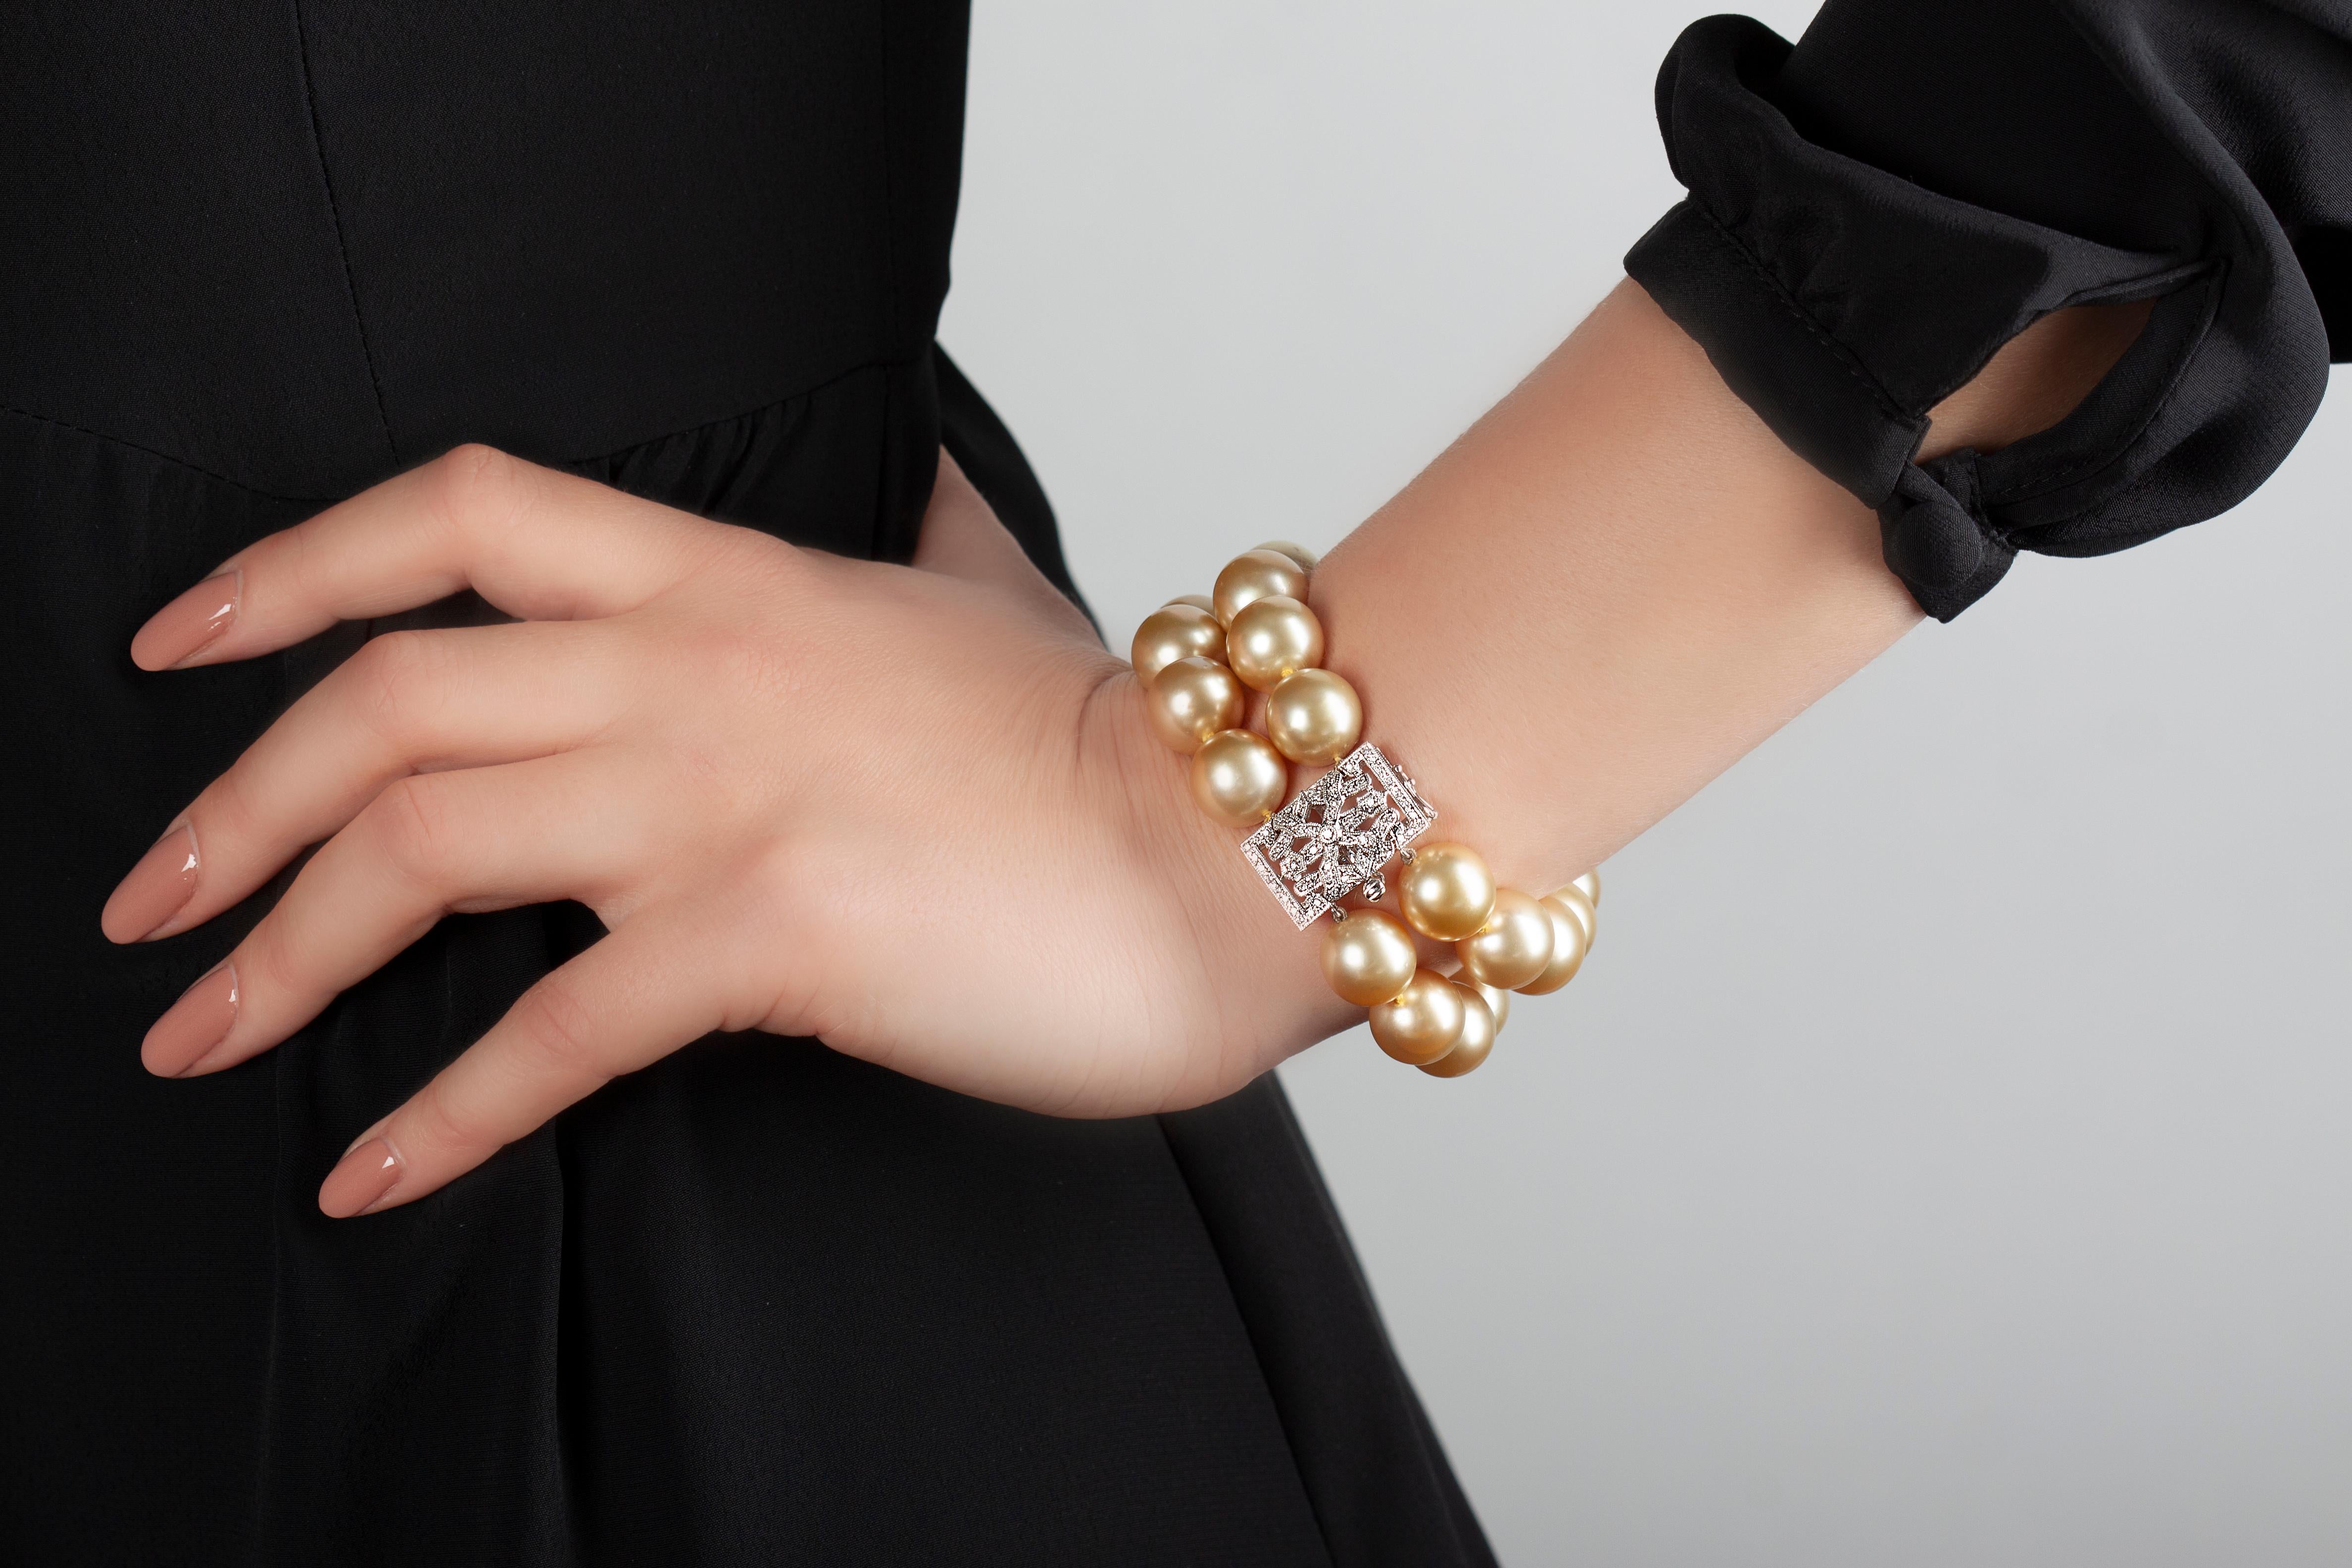 This sumptuous bracelet by Yoko London features two rows of vivid Golden South Sea pearls which are perfectly accentuated by a scintillating, art-deco style diamond clasp. The rarest of all pearl varieties, the Golden South Sea Pearls featured in